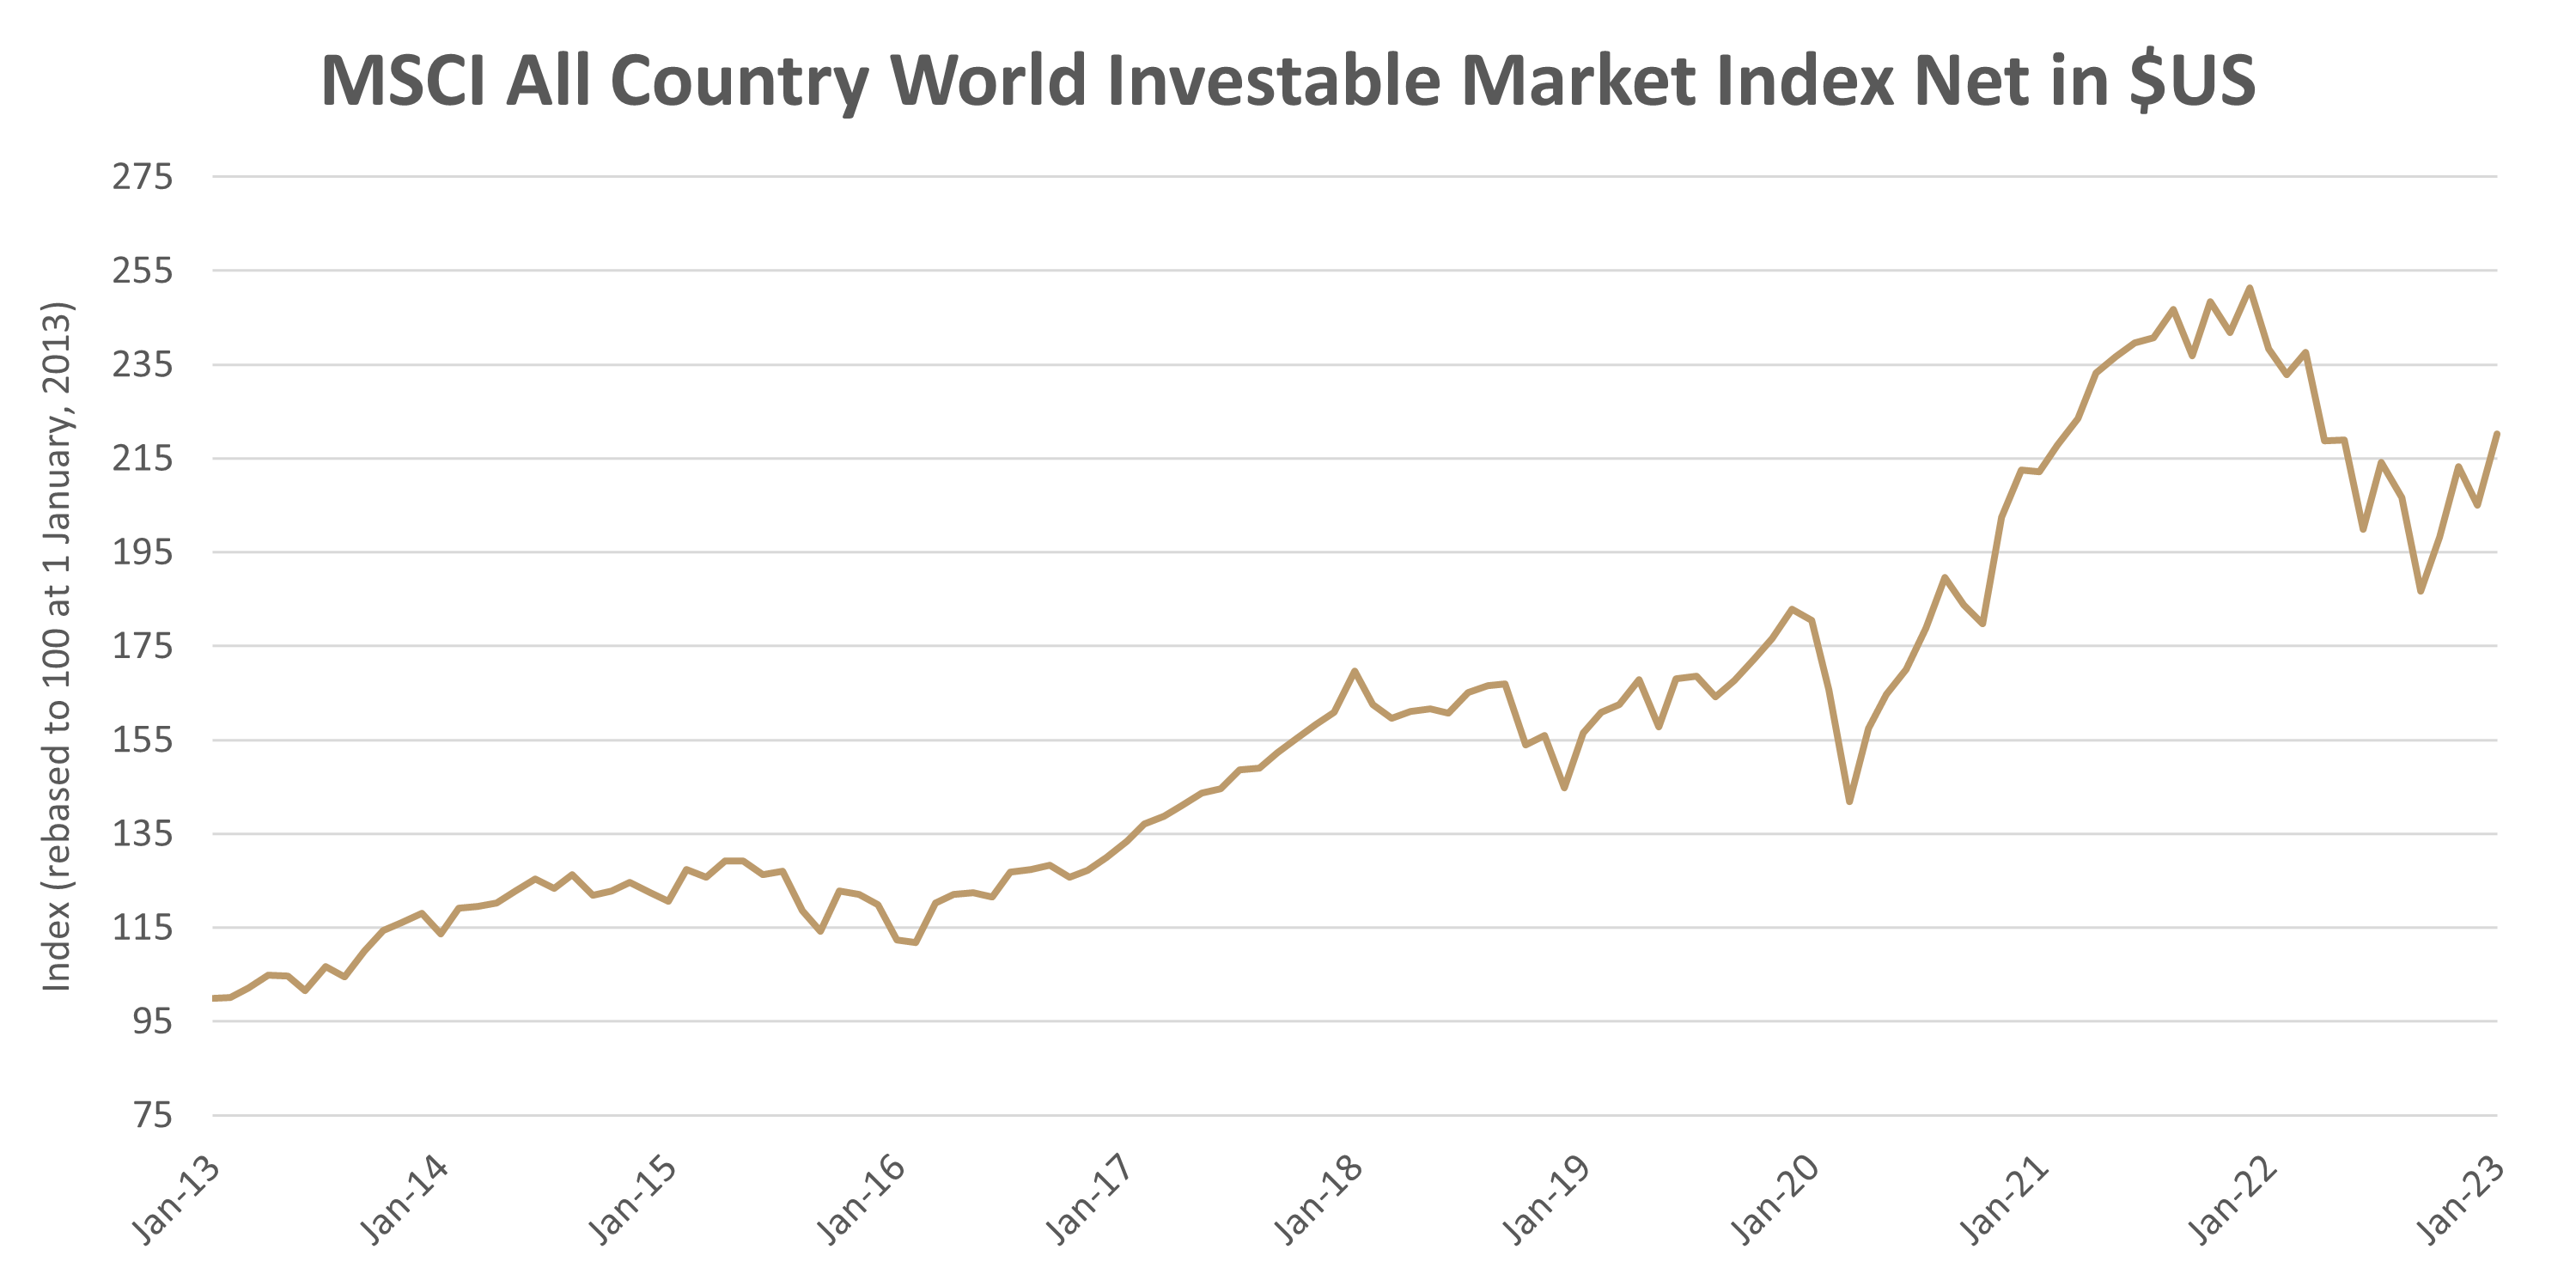 MSCI All Country World Investable Market Index Net in $US